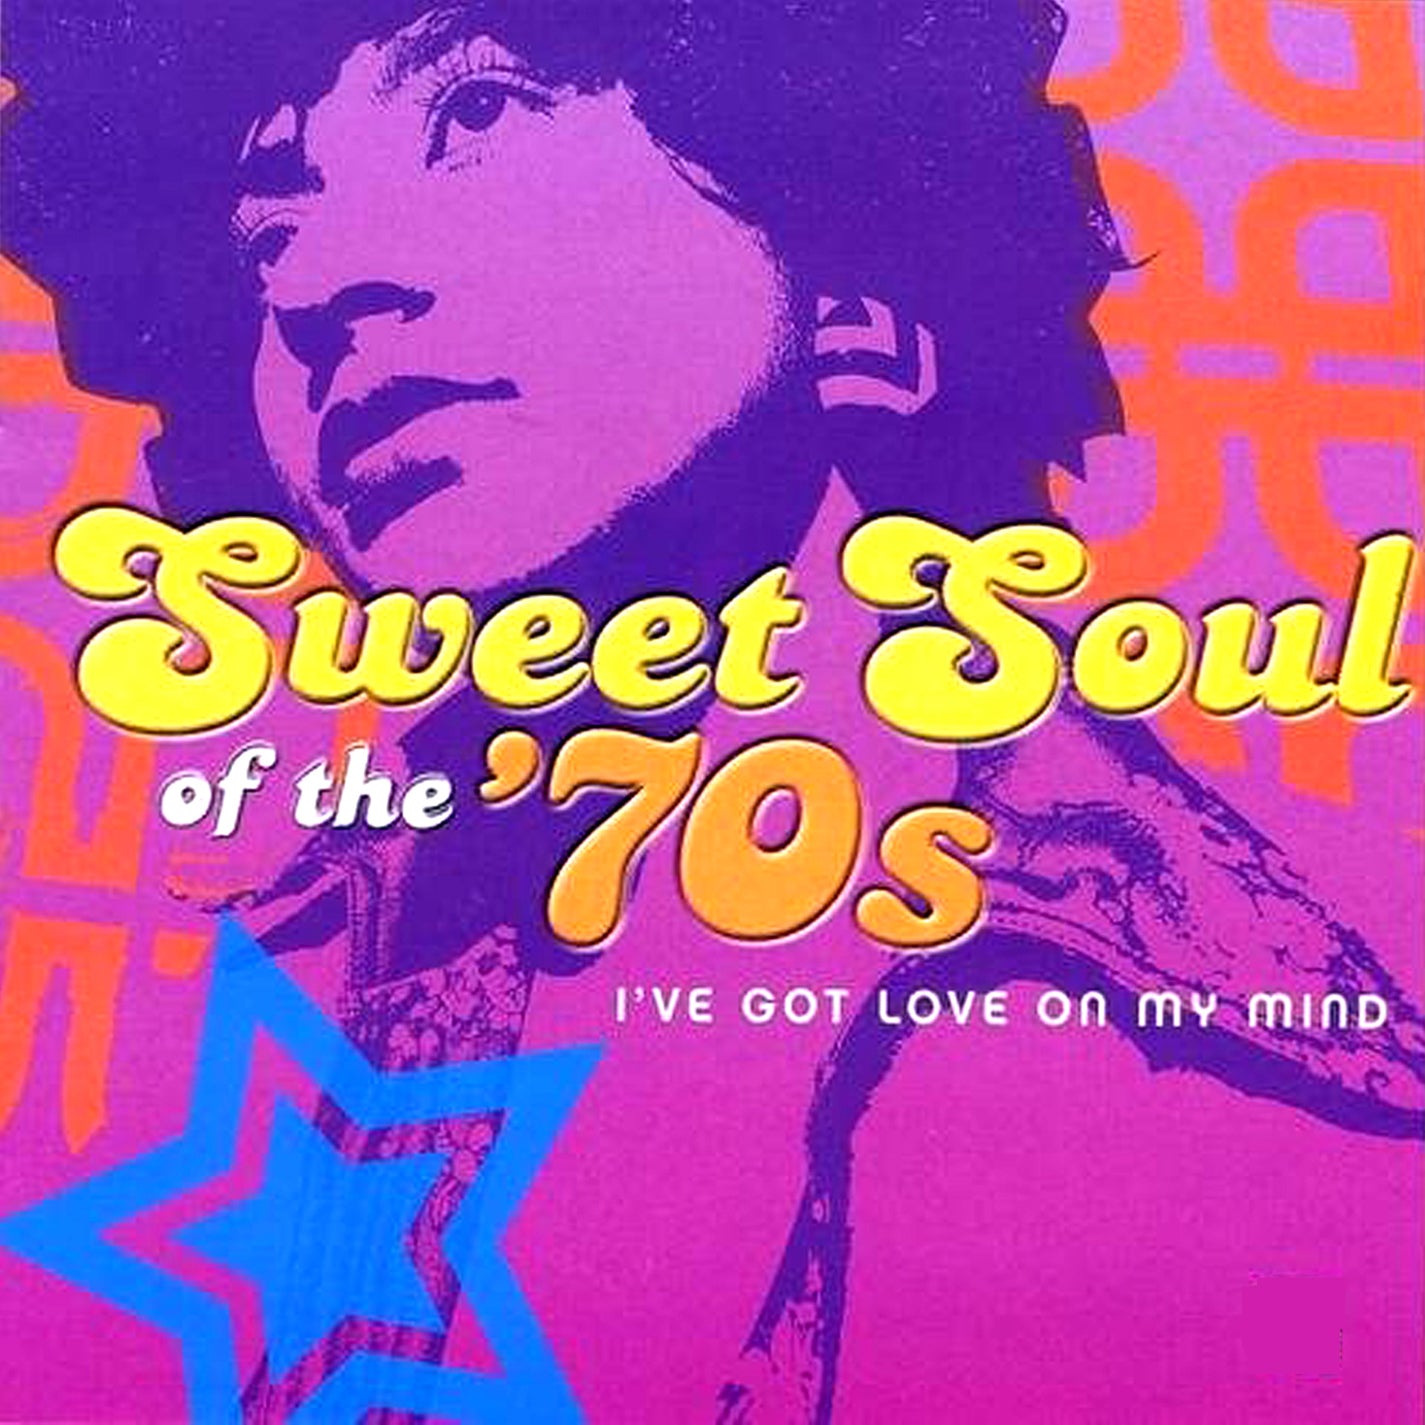 SWEET SOUL OF THE 70'S - I GOT LOVE ON MY MIND - VARIOUS ARTISTS (CD LP) c1970